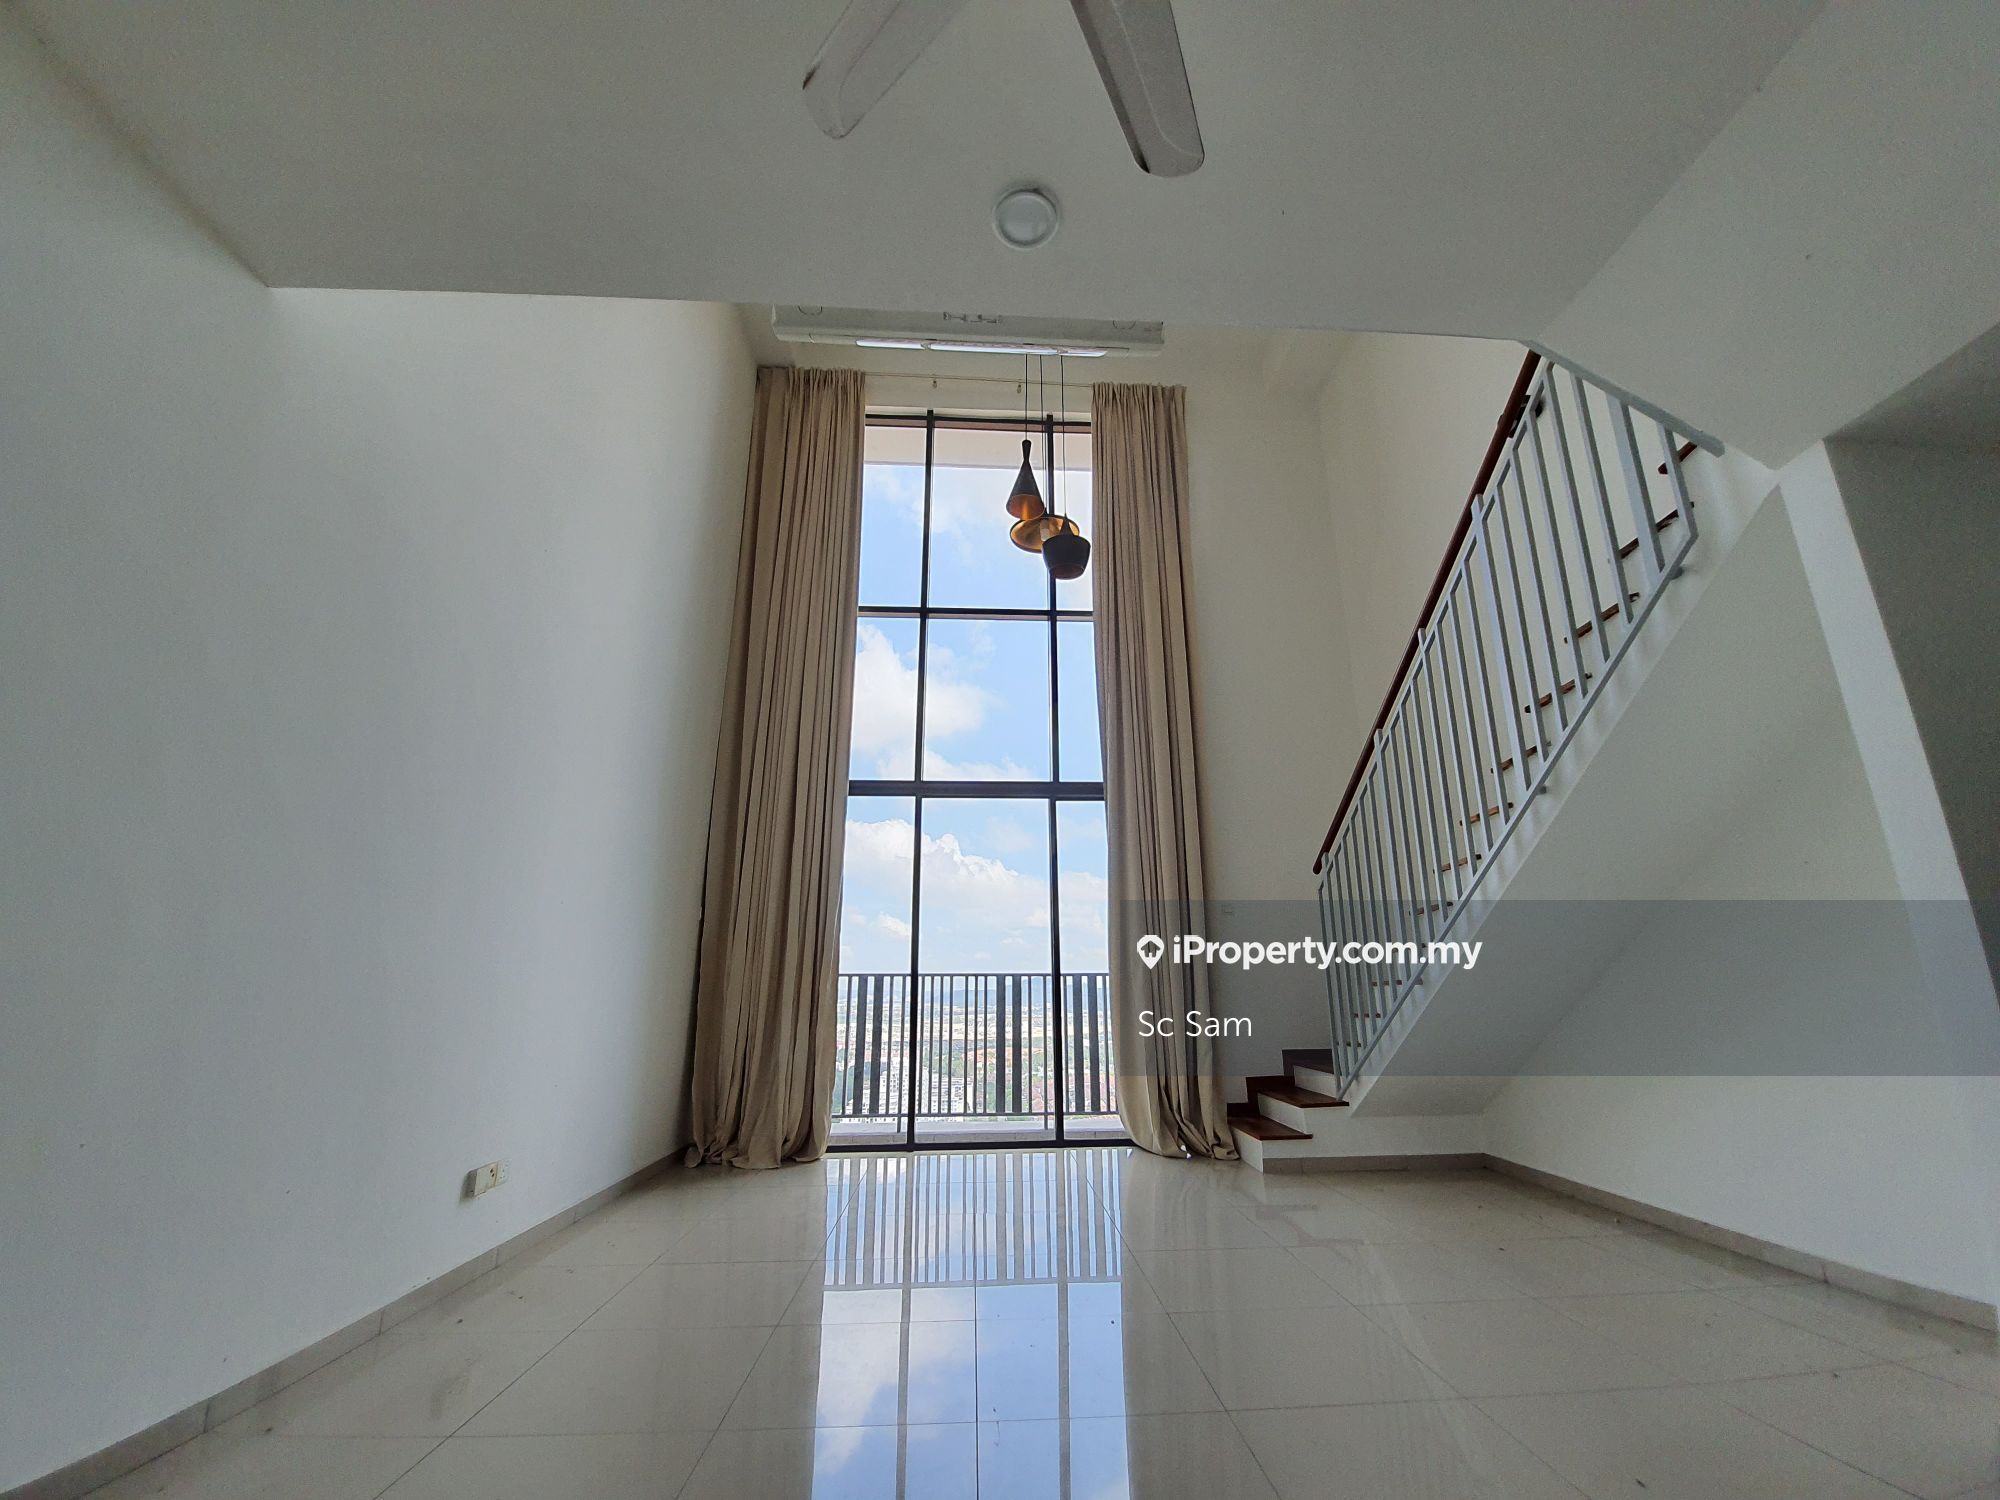 Partially furnished duplex with facilities and short walk to Mall